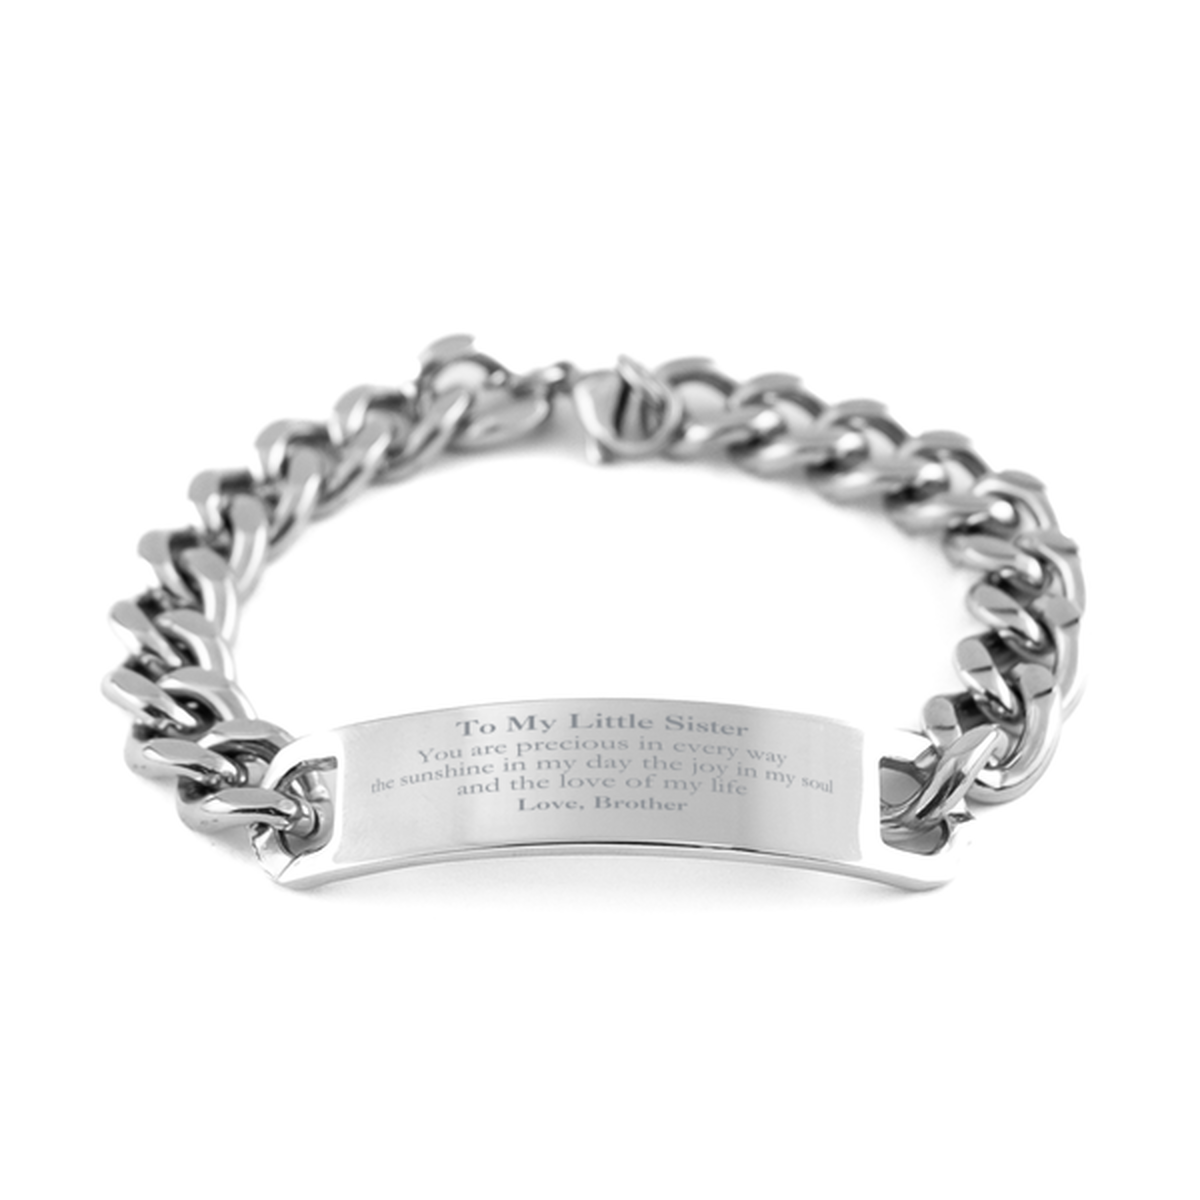 Graduation Gifts for Little Sister Cuban Chain Stainless Steel Bracelet Present from Brother, Christmas Little Sister Birthday Gifts Little Sister You are precious in every way the sunshine in my day. Love, Brother